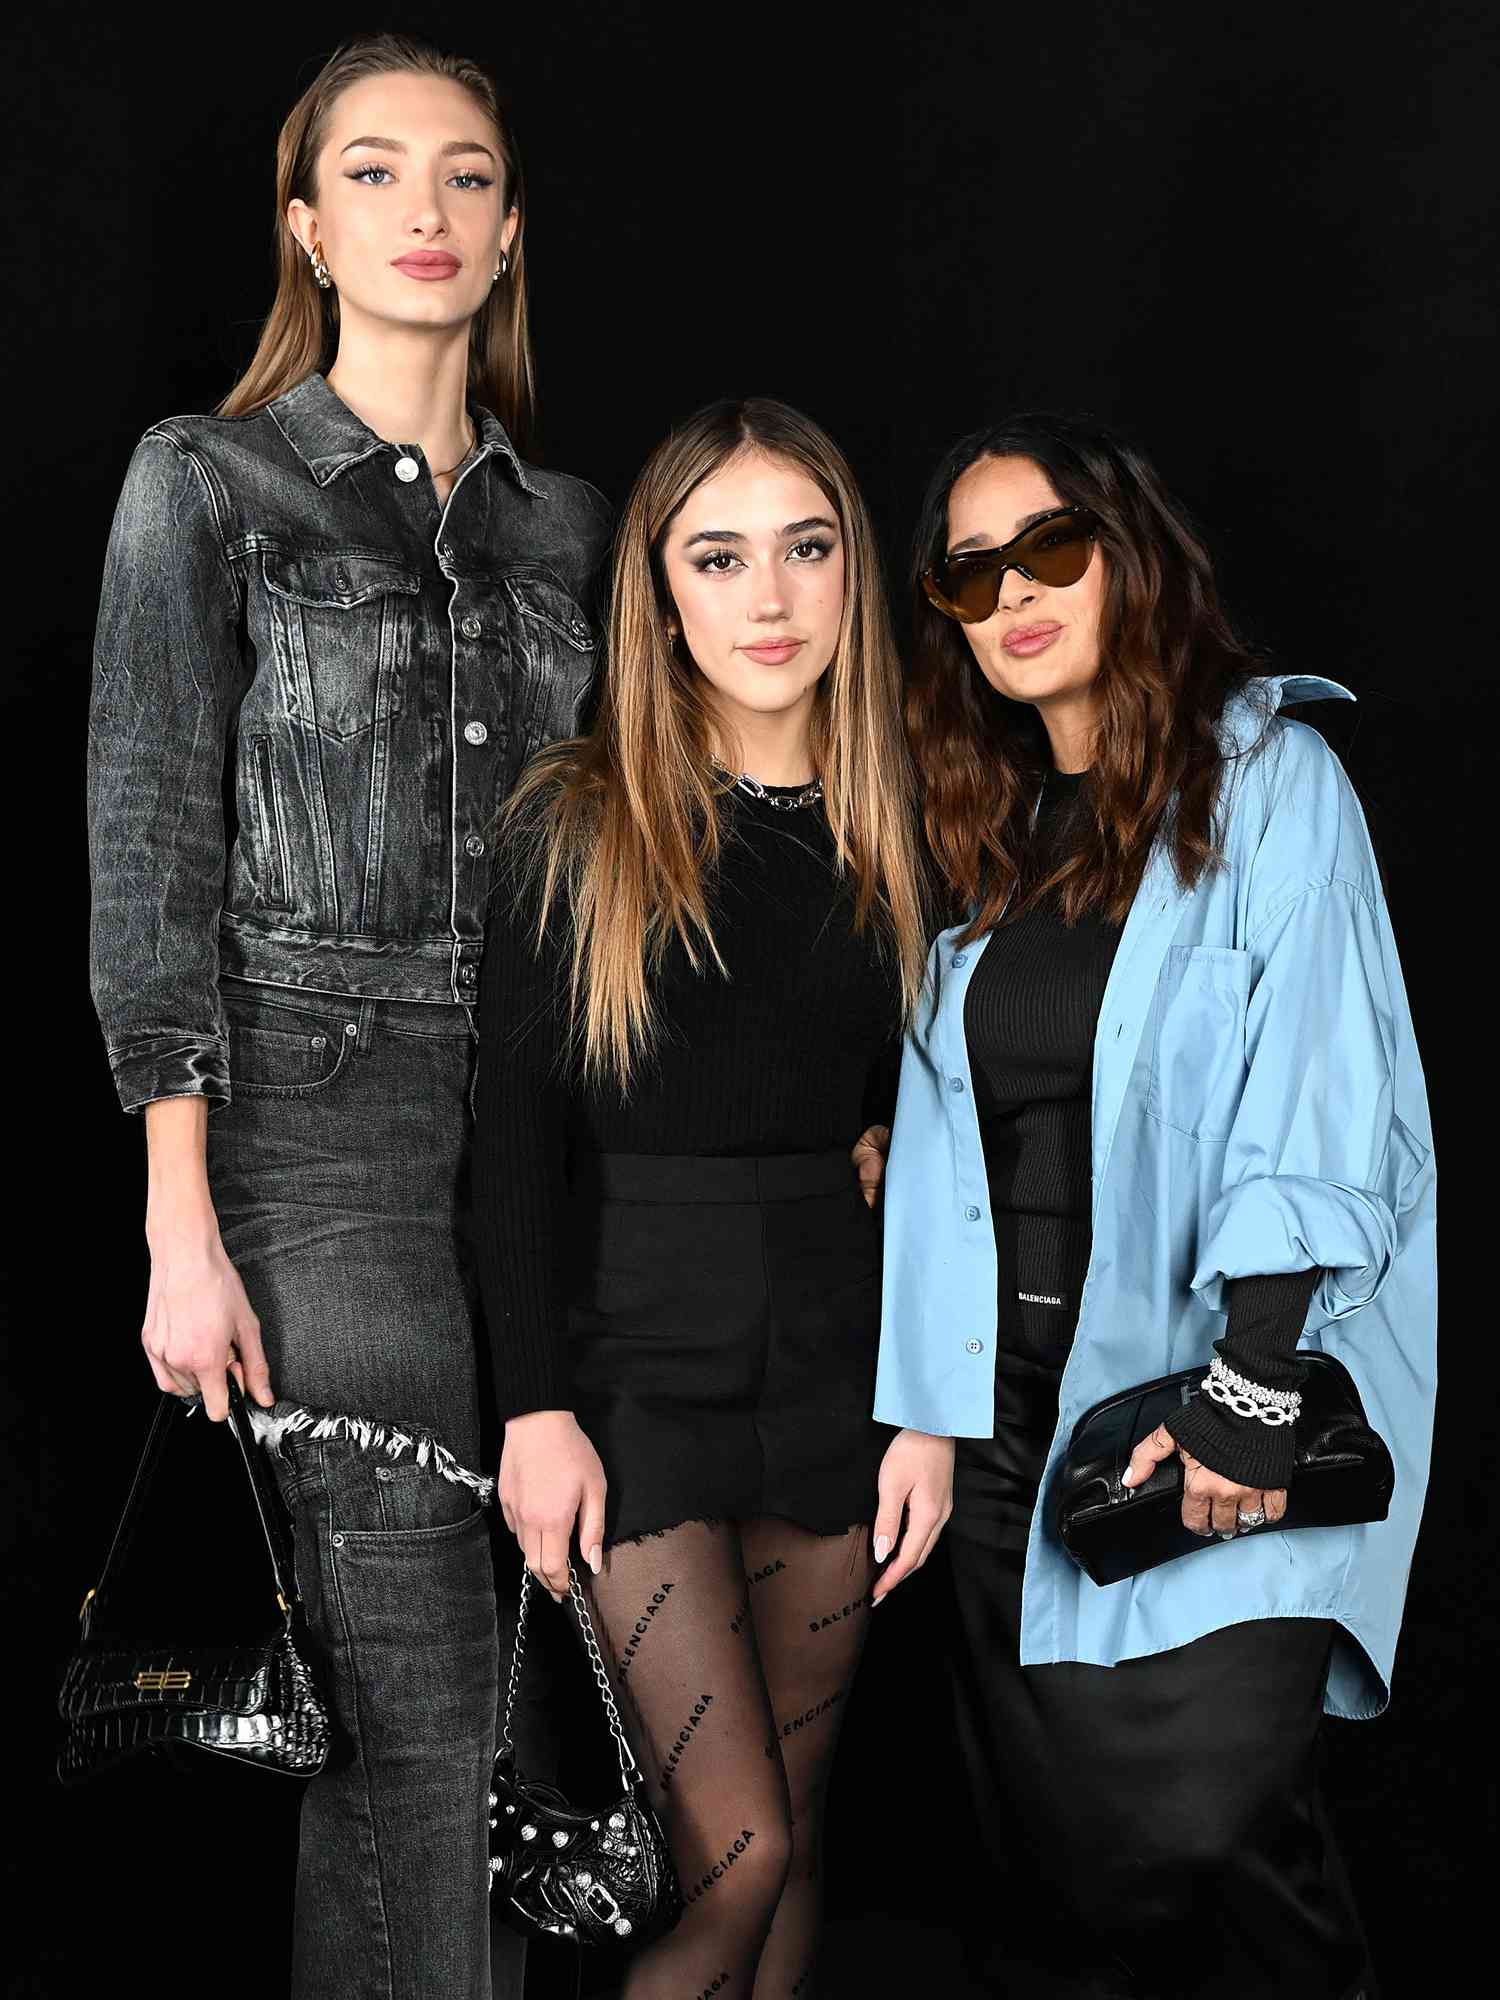 Mathilde Pinault, Valentina Paloma Pinault, and Salma Hayek attend the Balenciaga FW 22 show on March 06, 2022 in Le Bourget, France. 